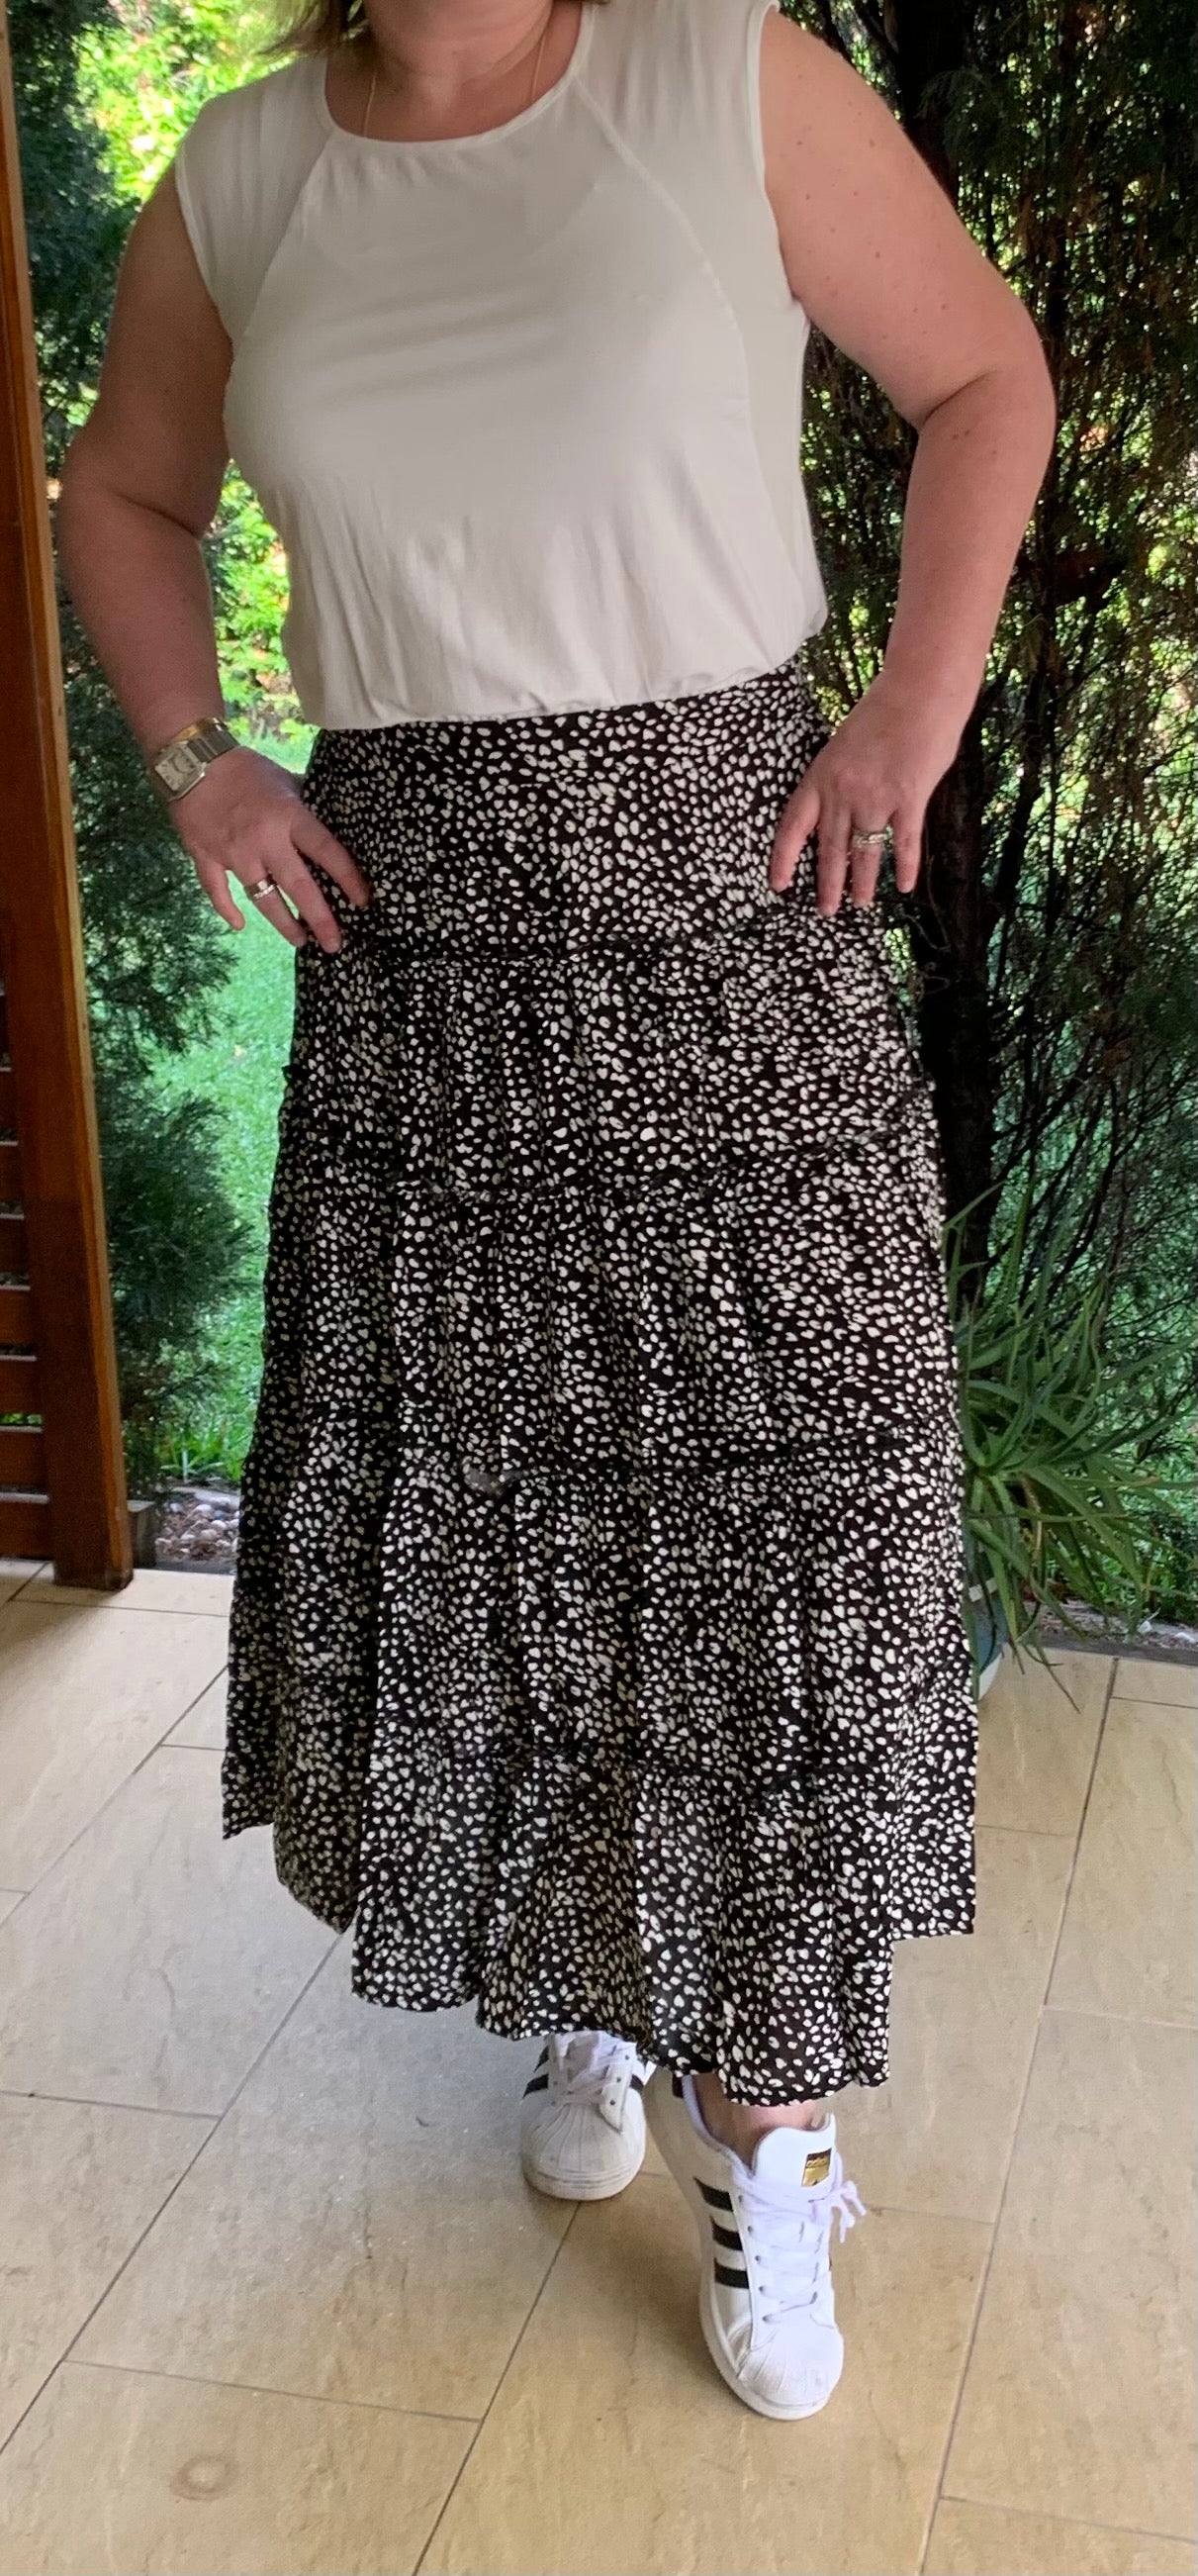 Silver Wishes Tiered Black & White Pattern Maxi Skirt with Elastic Waist